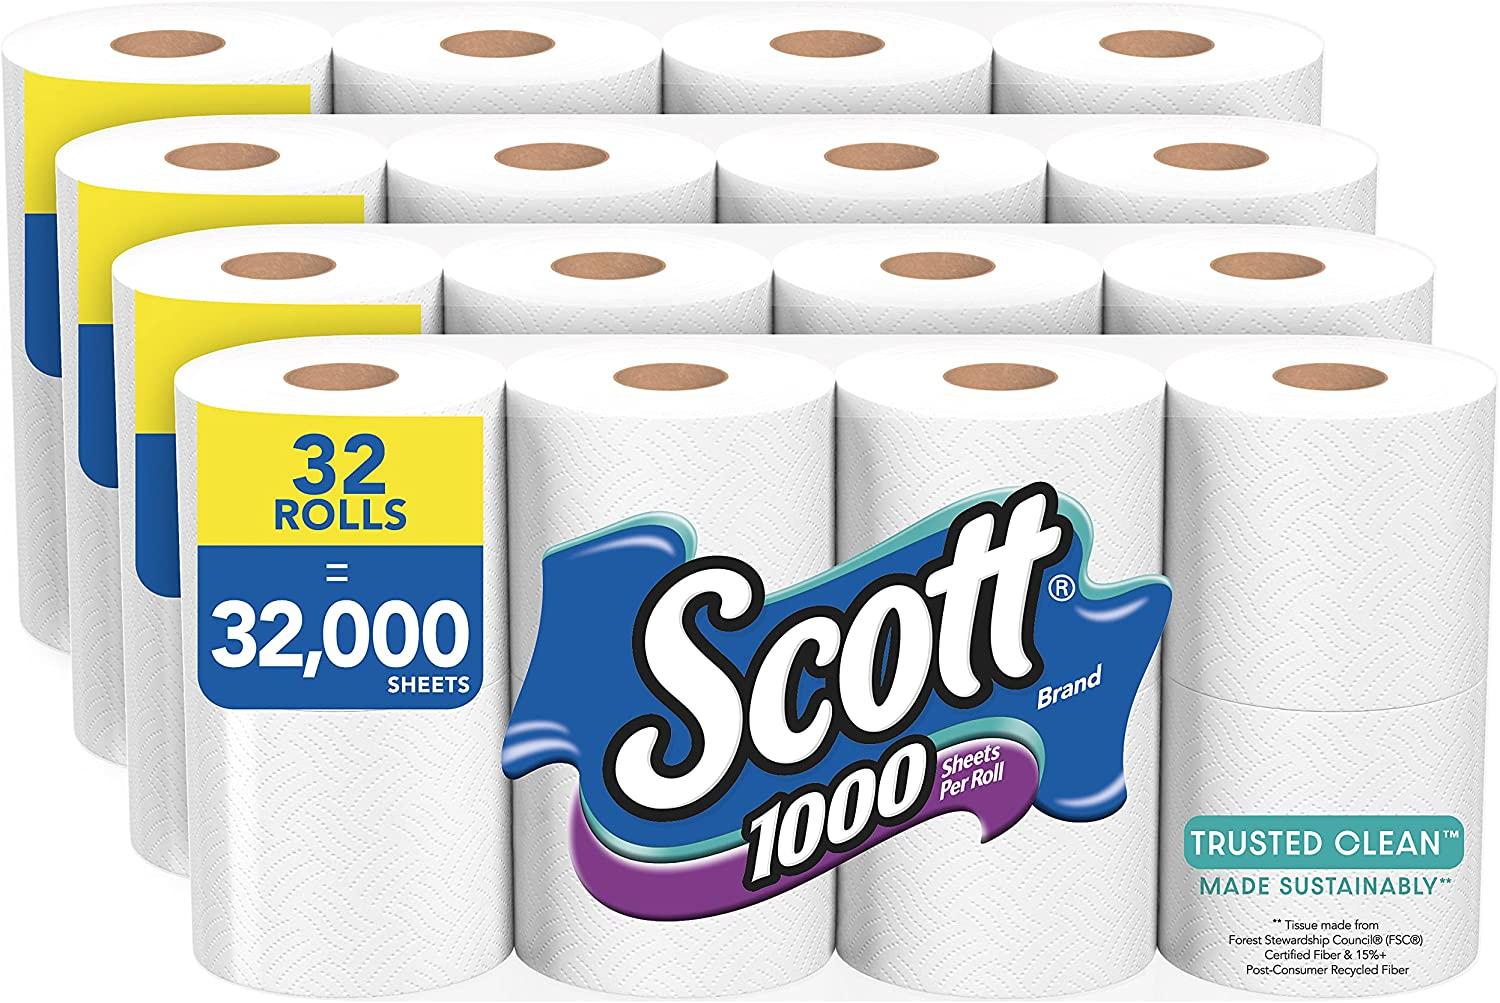 32 Scott 1000 Sheets Per Roll Toilet Paper for $21.16 Shipped